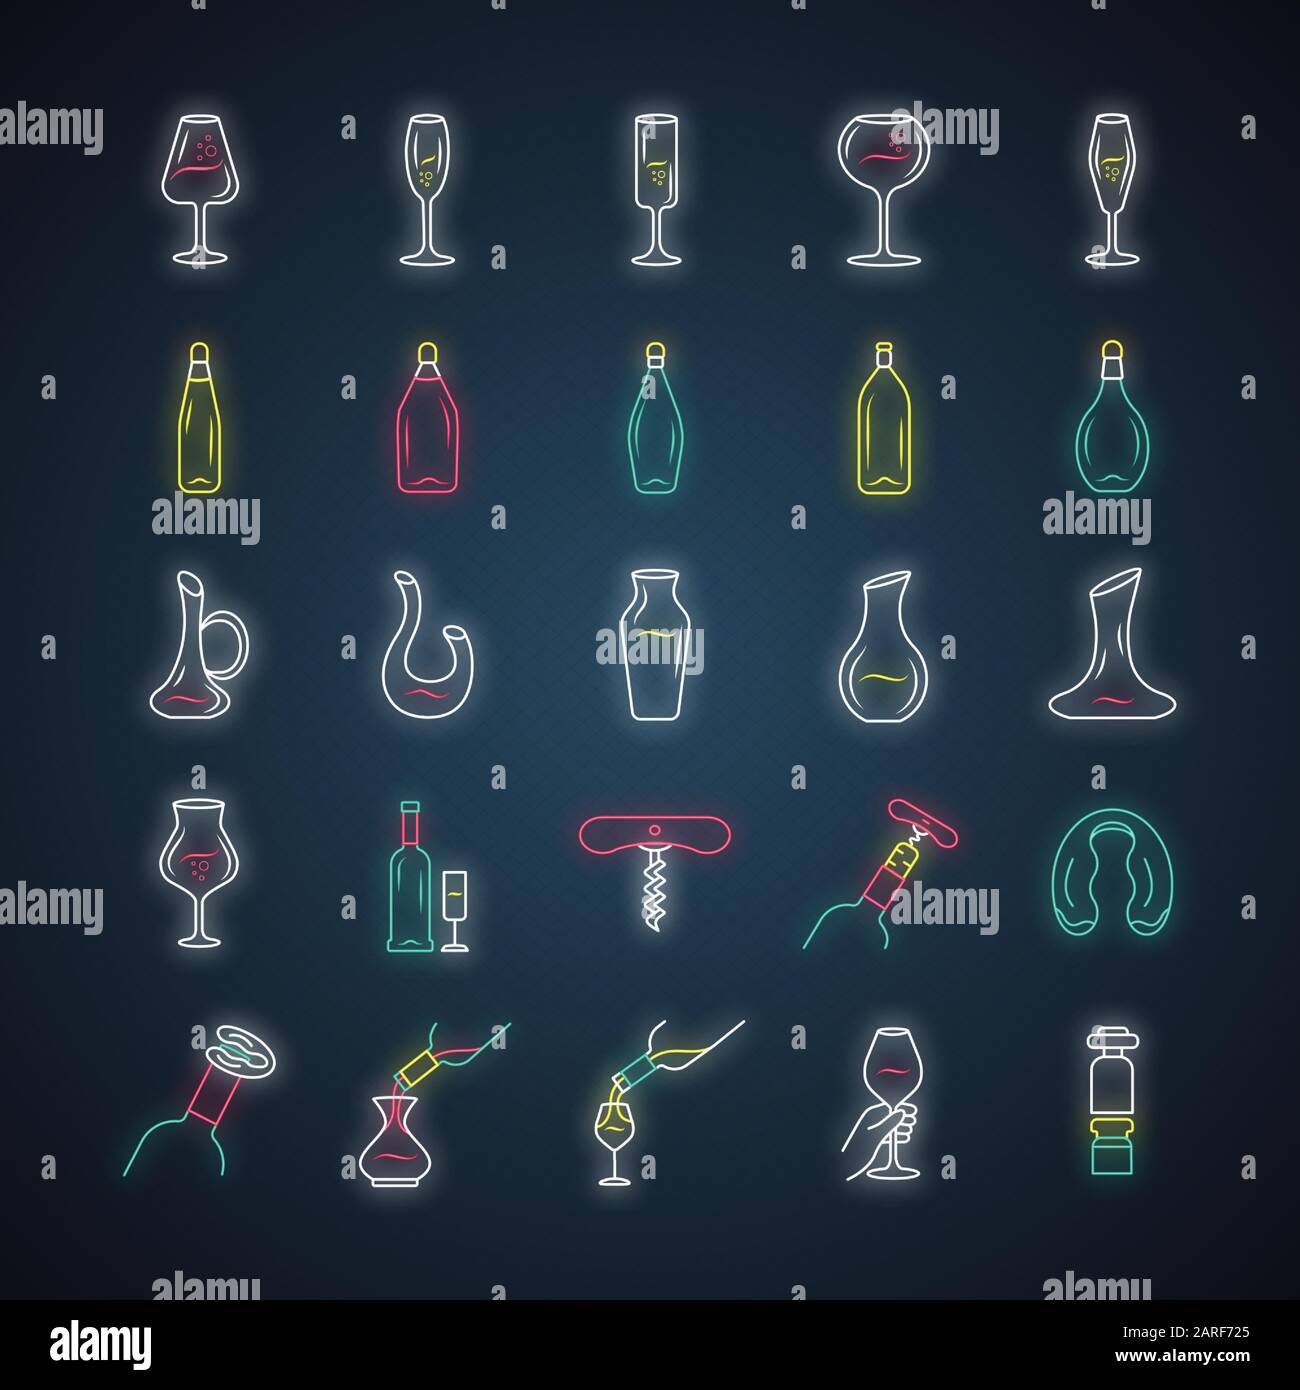 Wine and wineglasses neon light icons set. Different types of bar glassware and alcohol beverages. Decanters, bottles, barman tools. Glowing signs. Ve Stock Vector